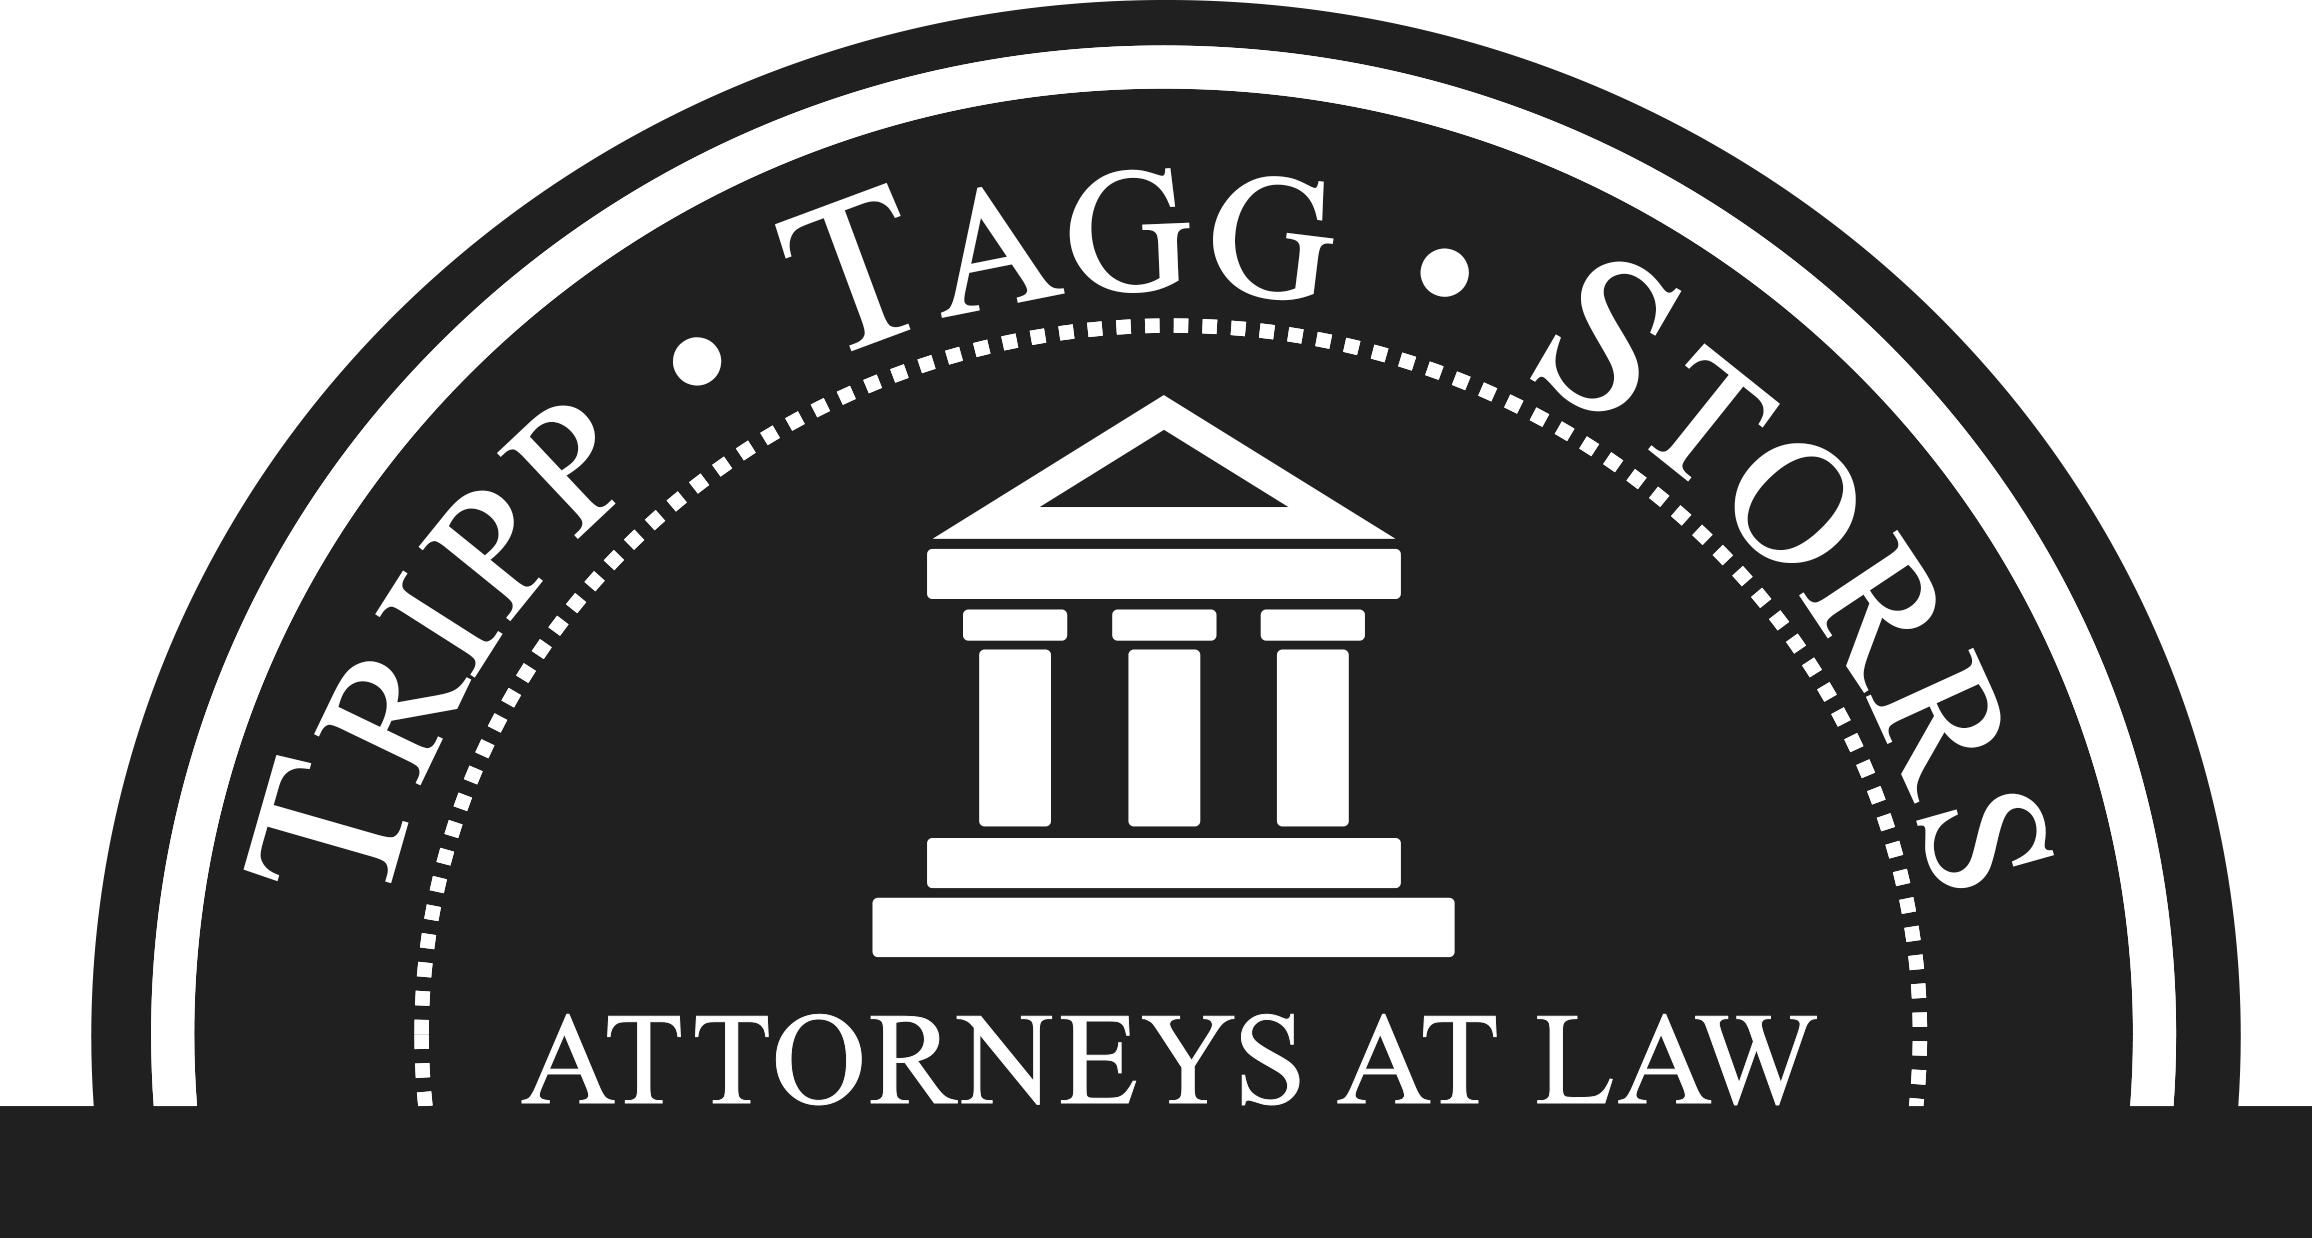 Tripp, Tagg, Storrs Attorneys At Law